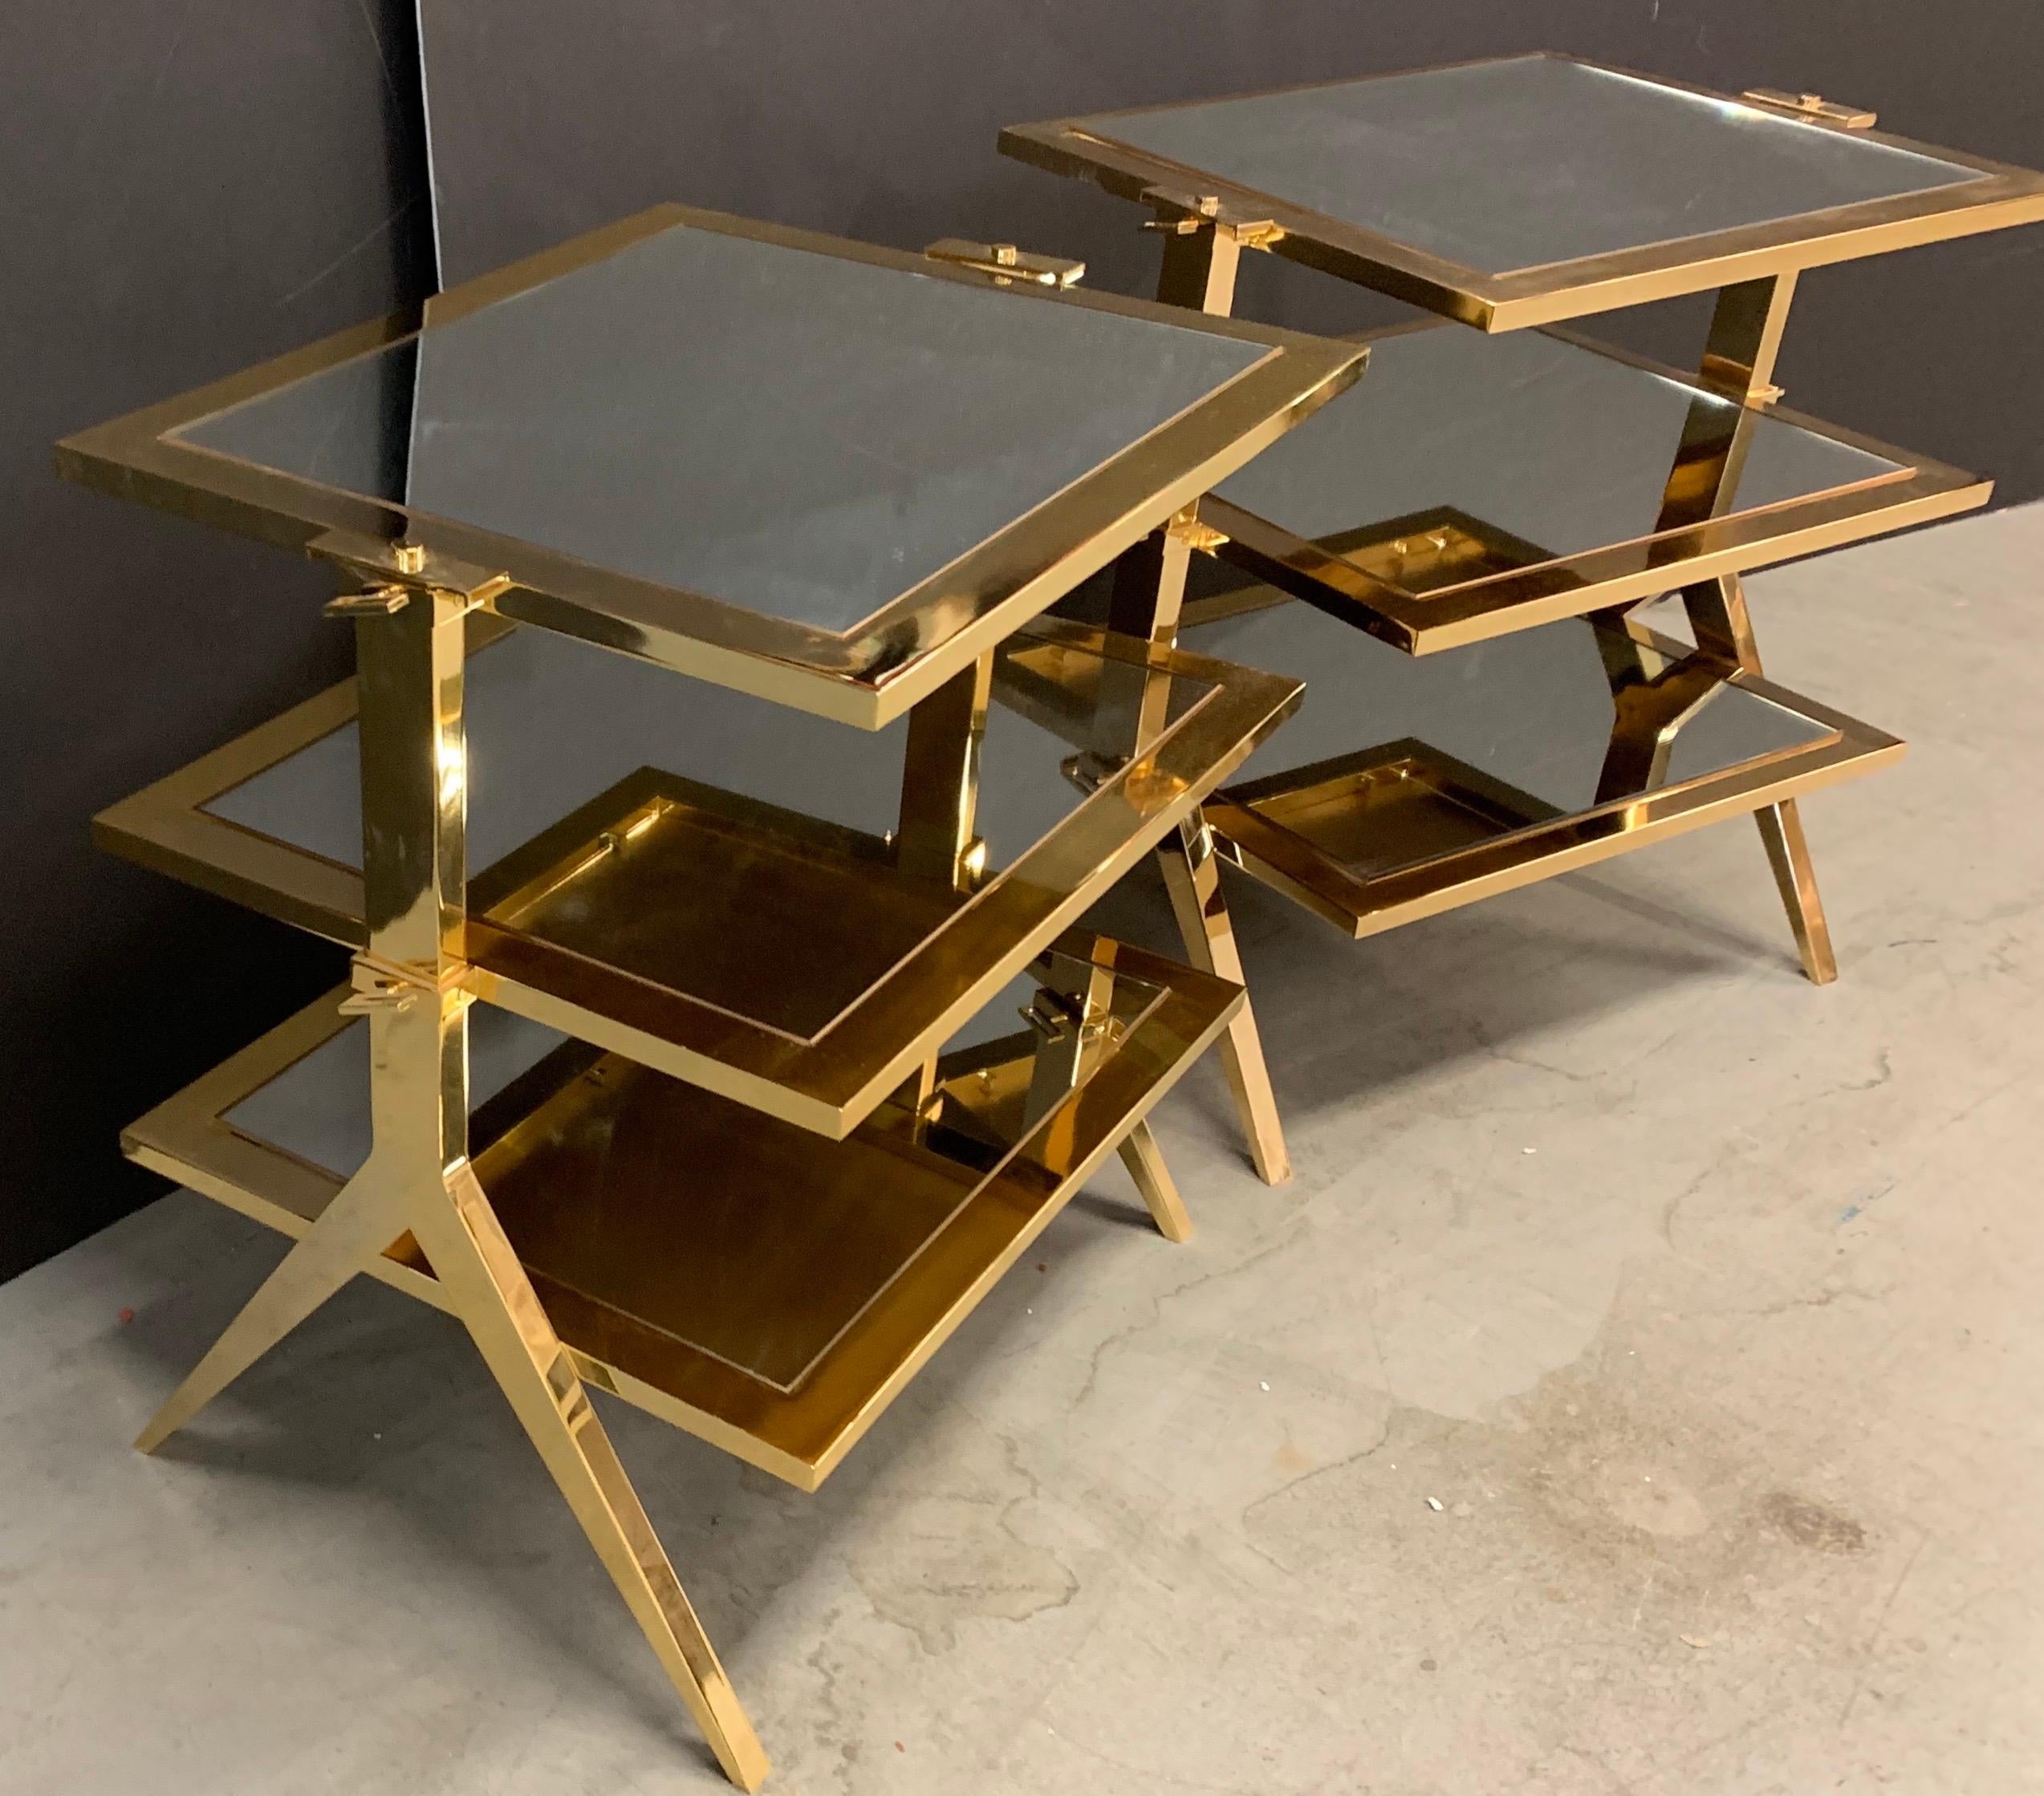 A wonderful pair of Lorin Marsh polished brass and mirror three-tier side tables

Each sold separately

Measurements:
28.5